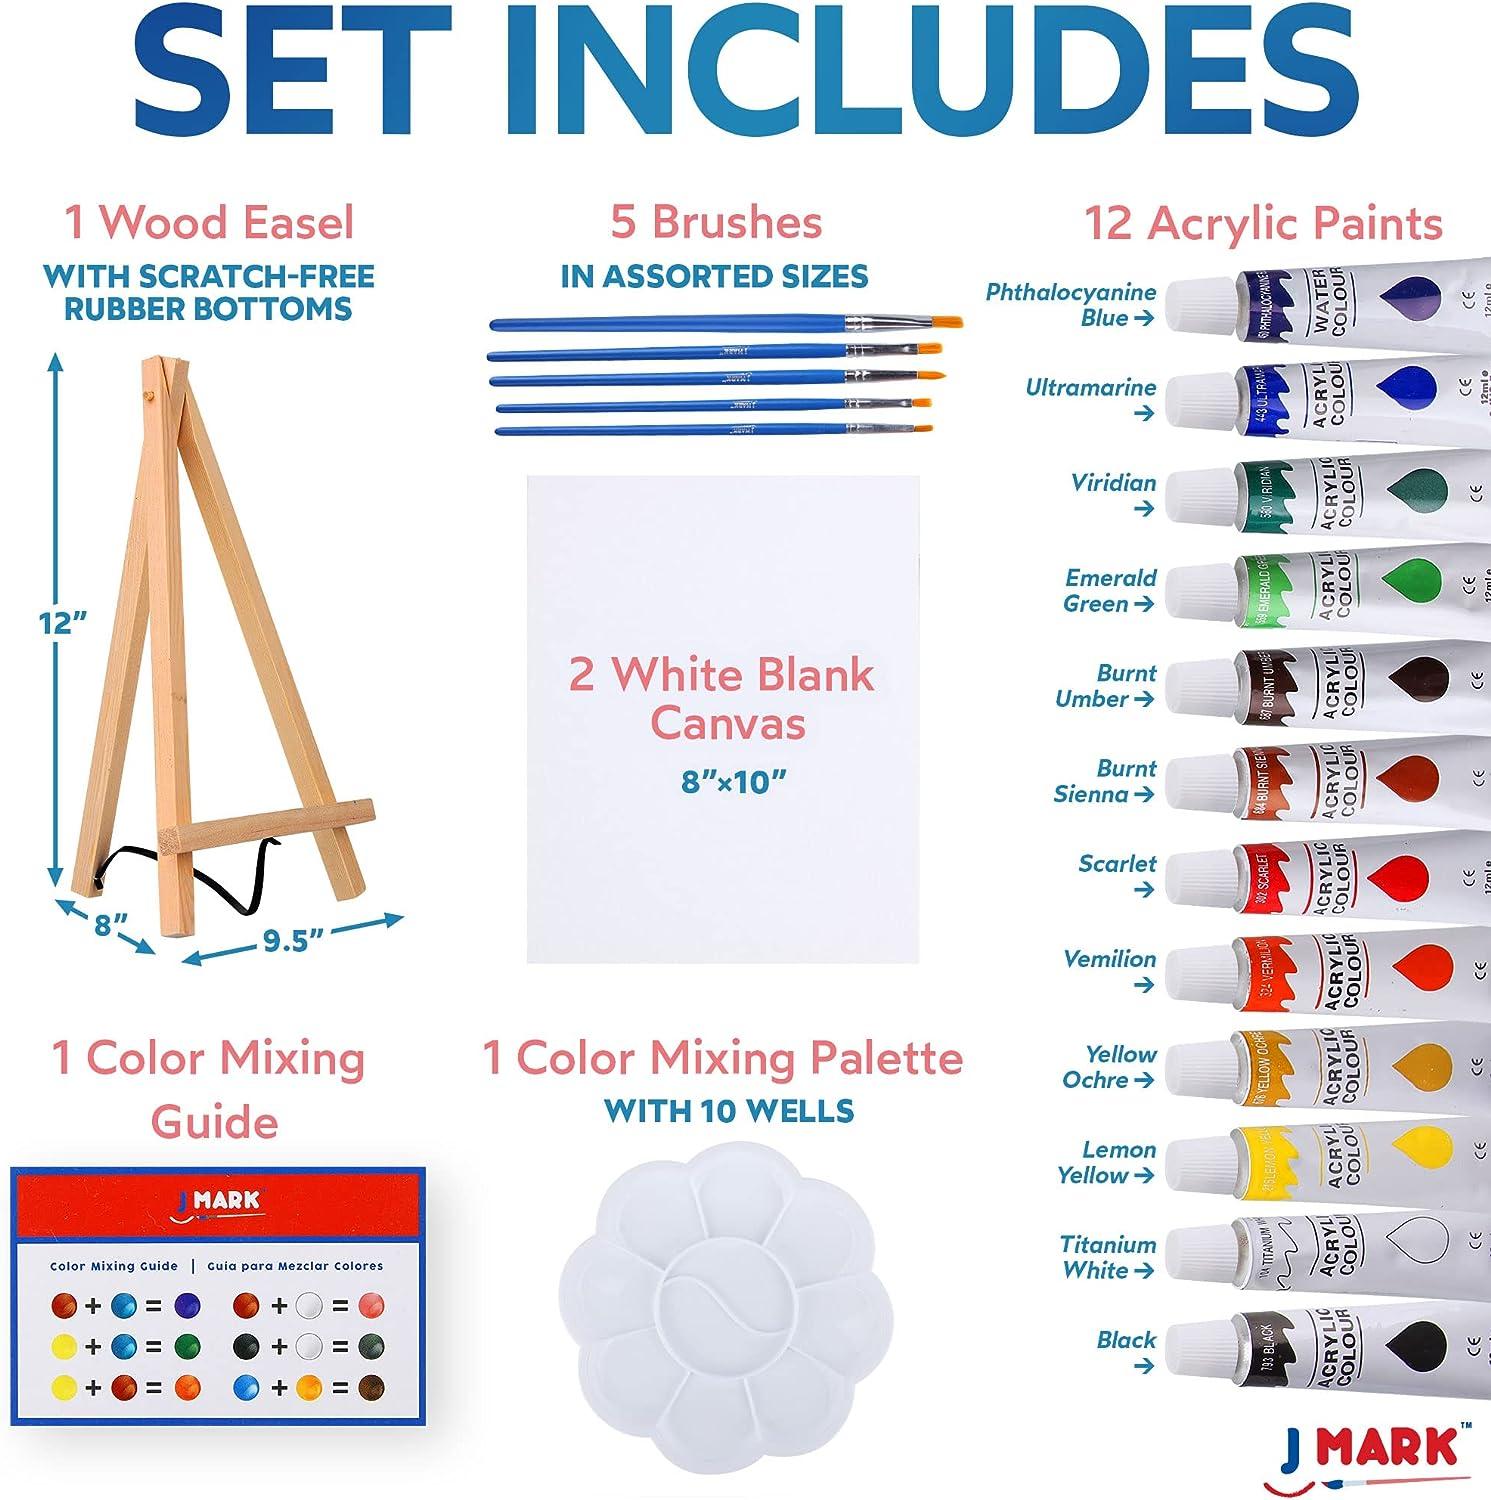 J MARK Paint Kit 22 Piece Set Acrylic Canvas Painting Kit with Wood Easel  8x10 inch Canvases 12 Washable Paints 5 Brushes Palette and Color Mixing  Guide